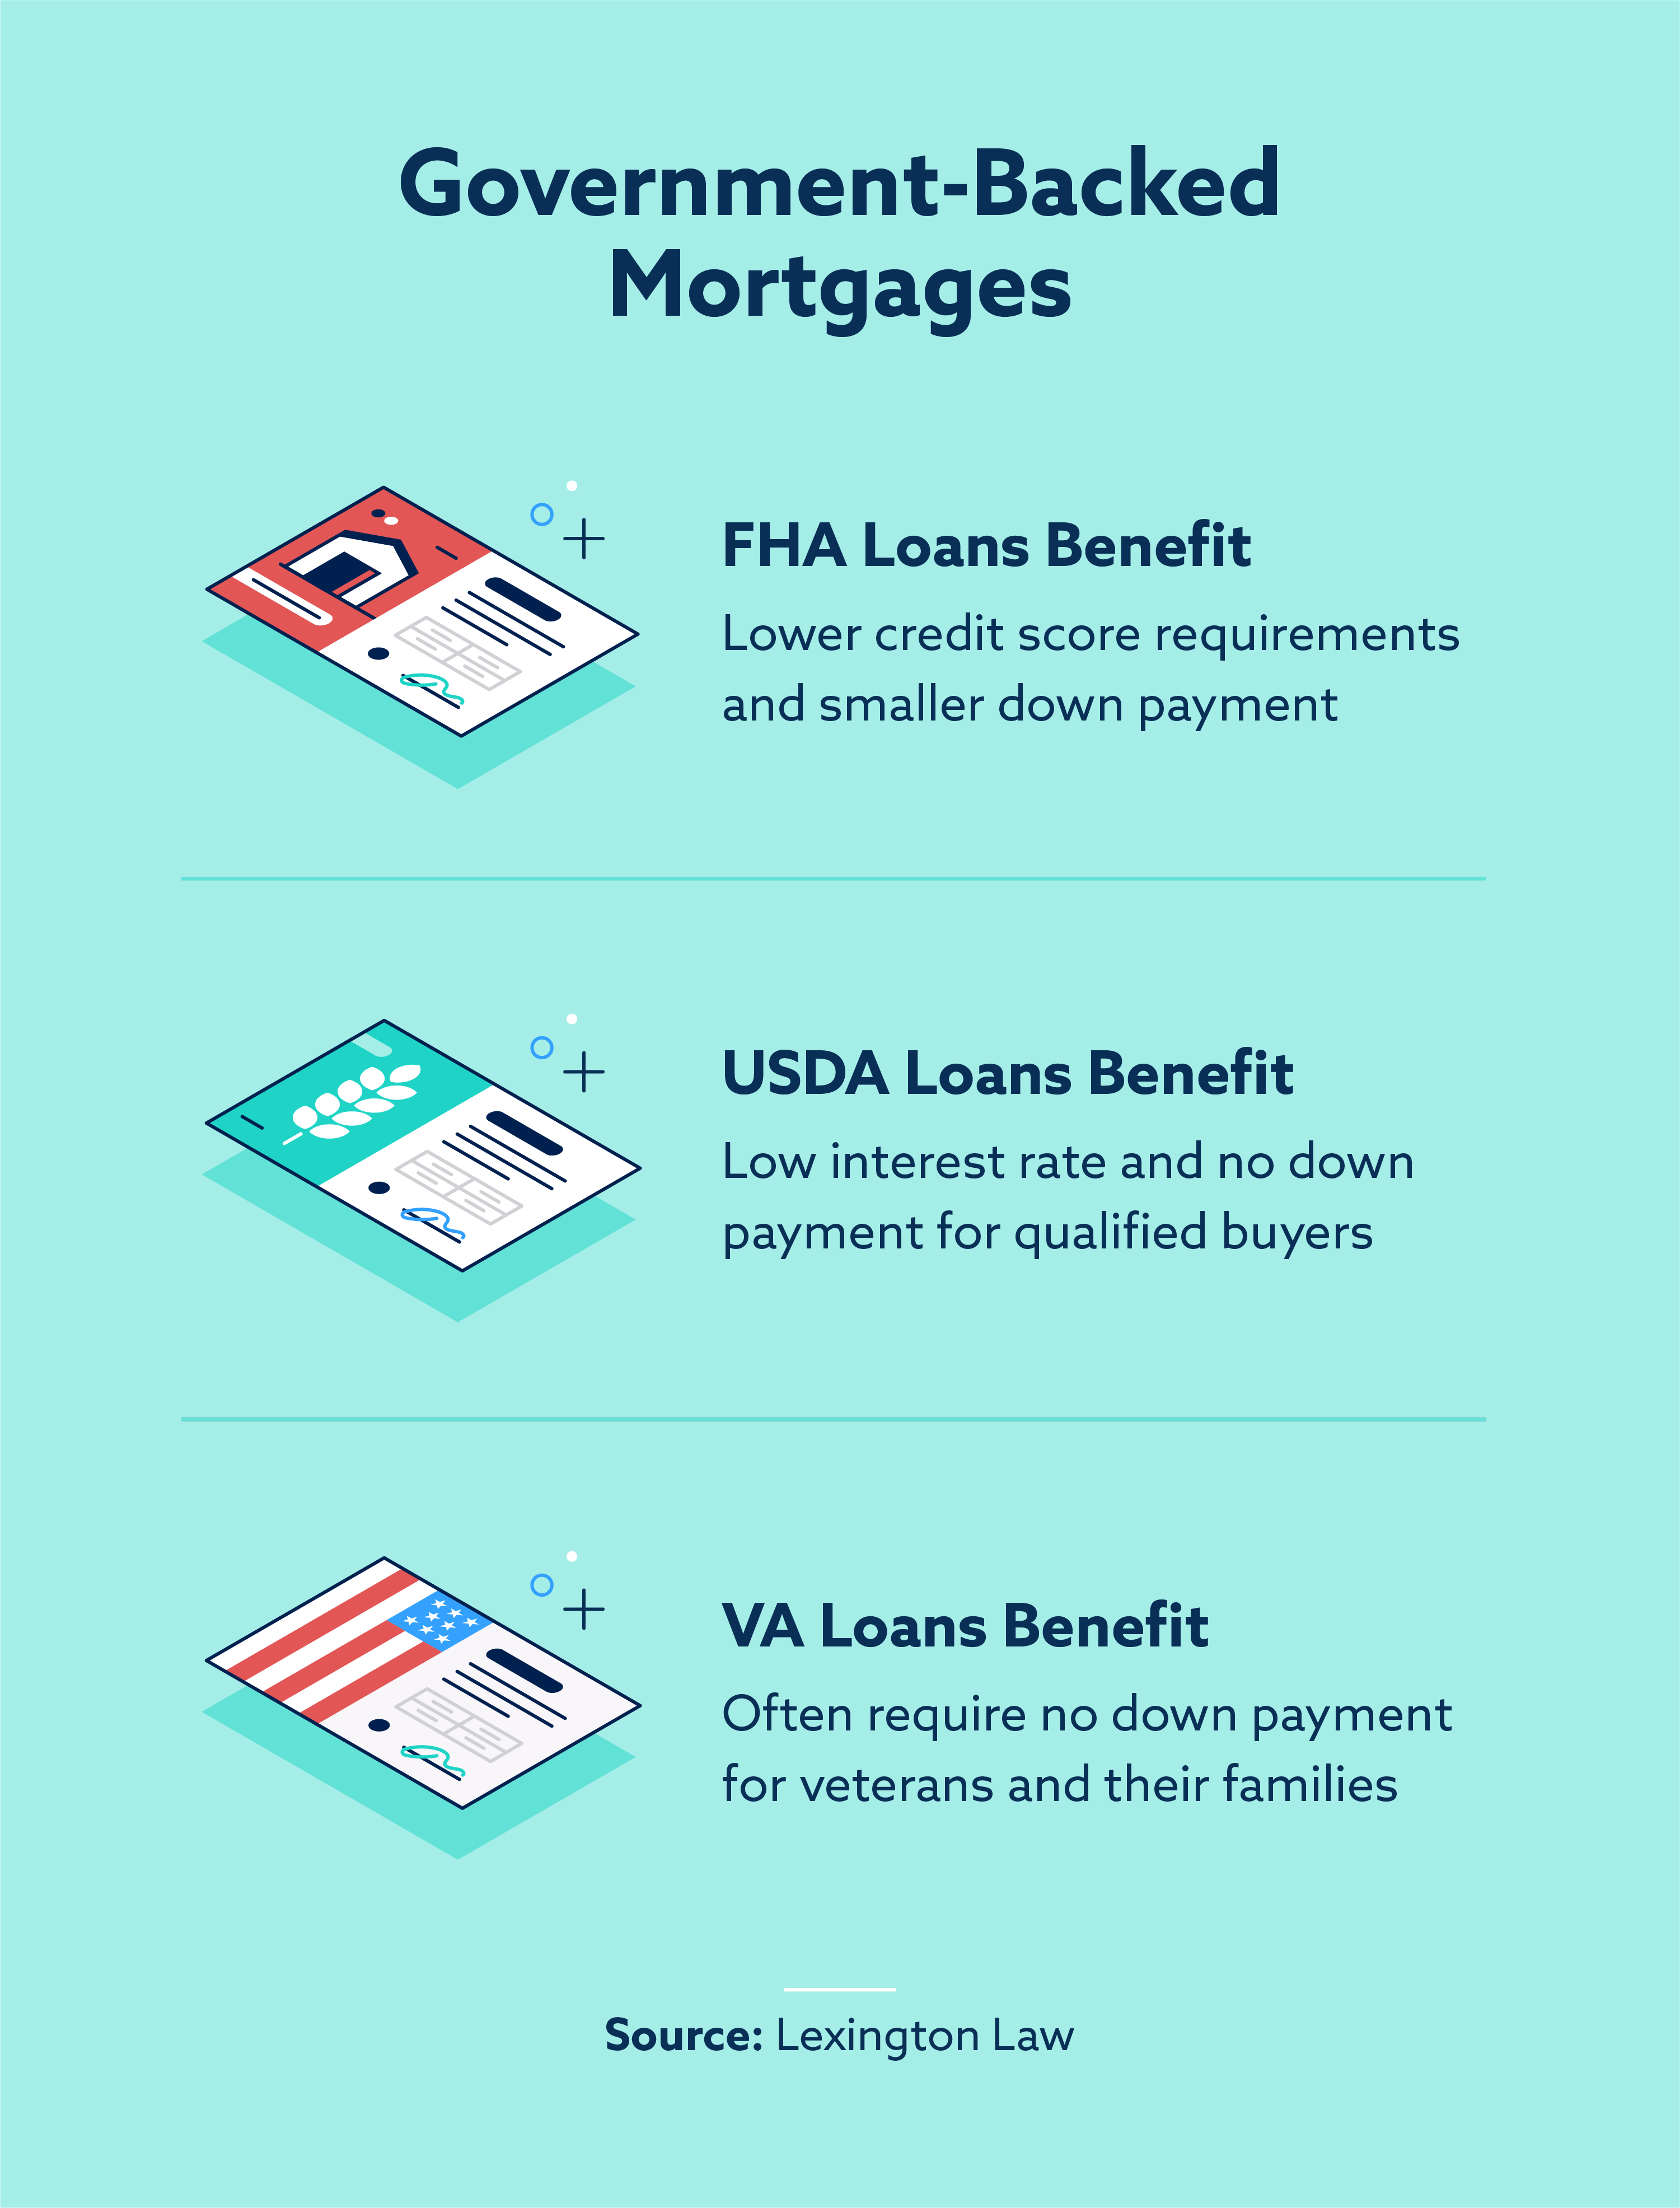 Government-backed mortgages